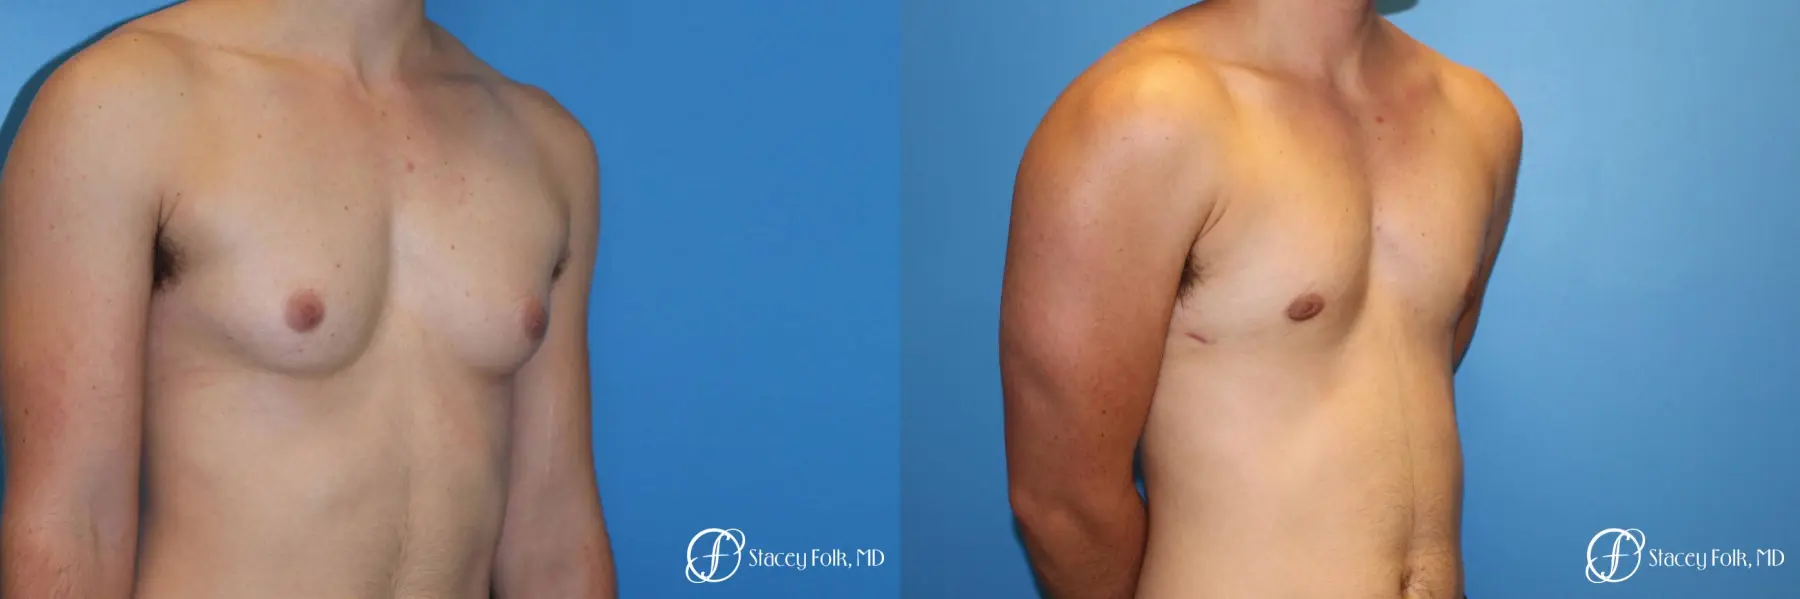 Denver FTM female to male top surgery using gynecomastia technique 5128 - Before and After 2